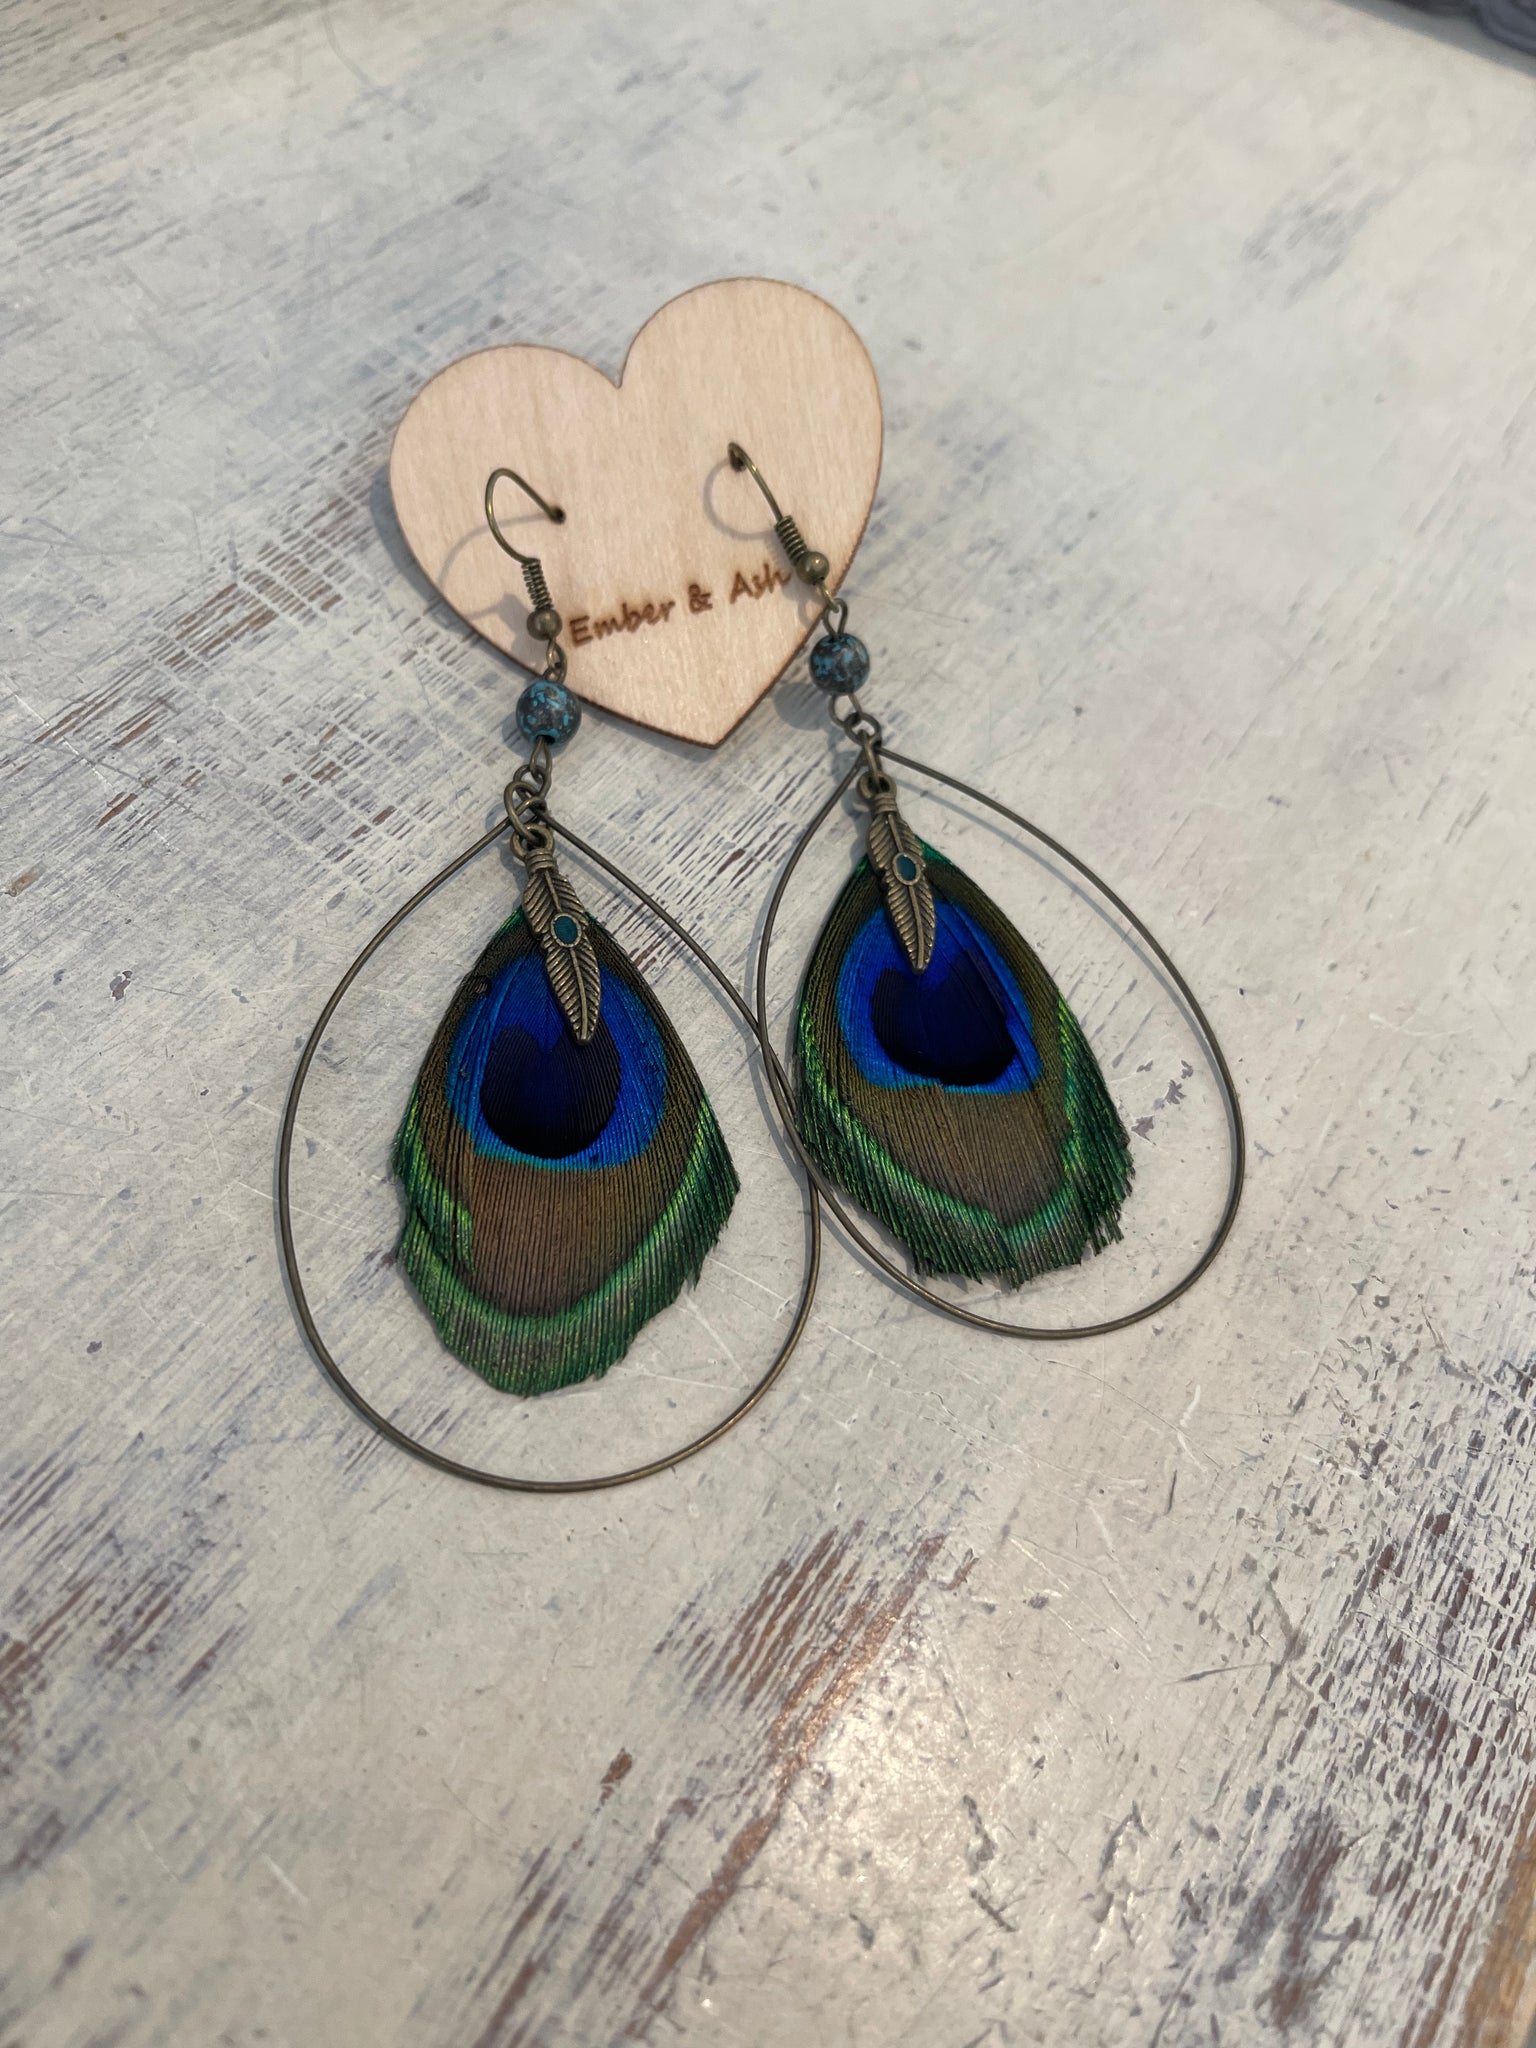 Aggregate 119+ peacock feather earrings online super hot